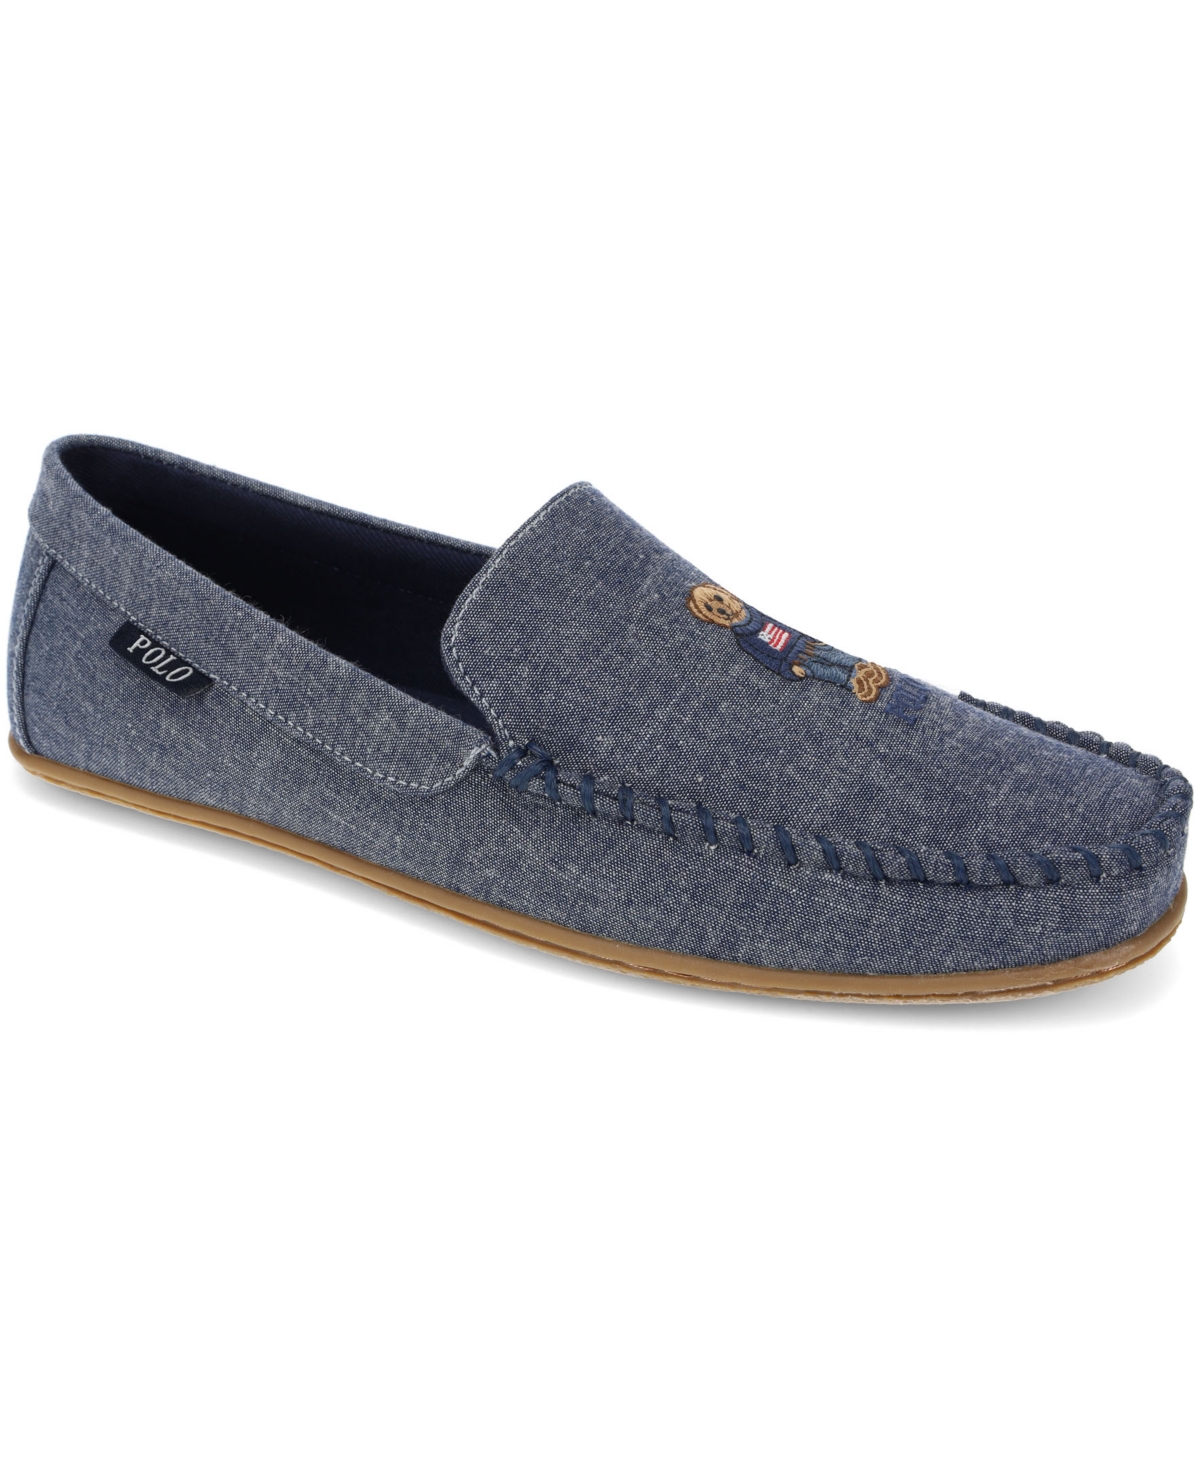 Polo Ralph Lauren Men's Collins Chambray Fabric Moccasin